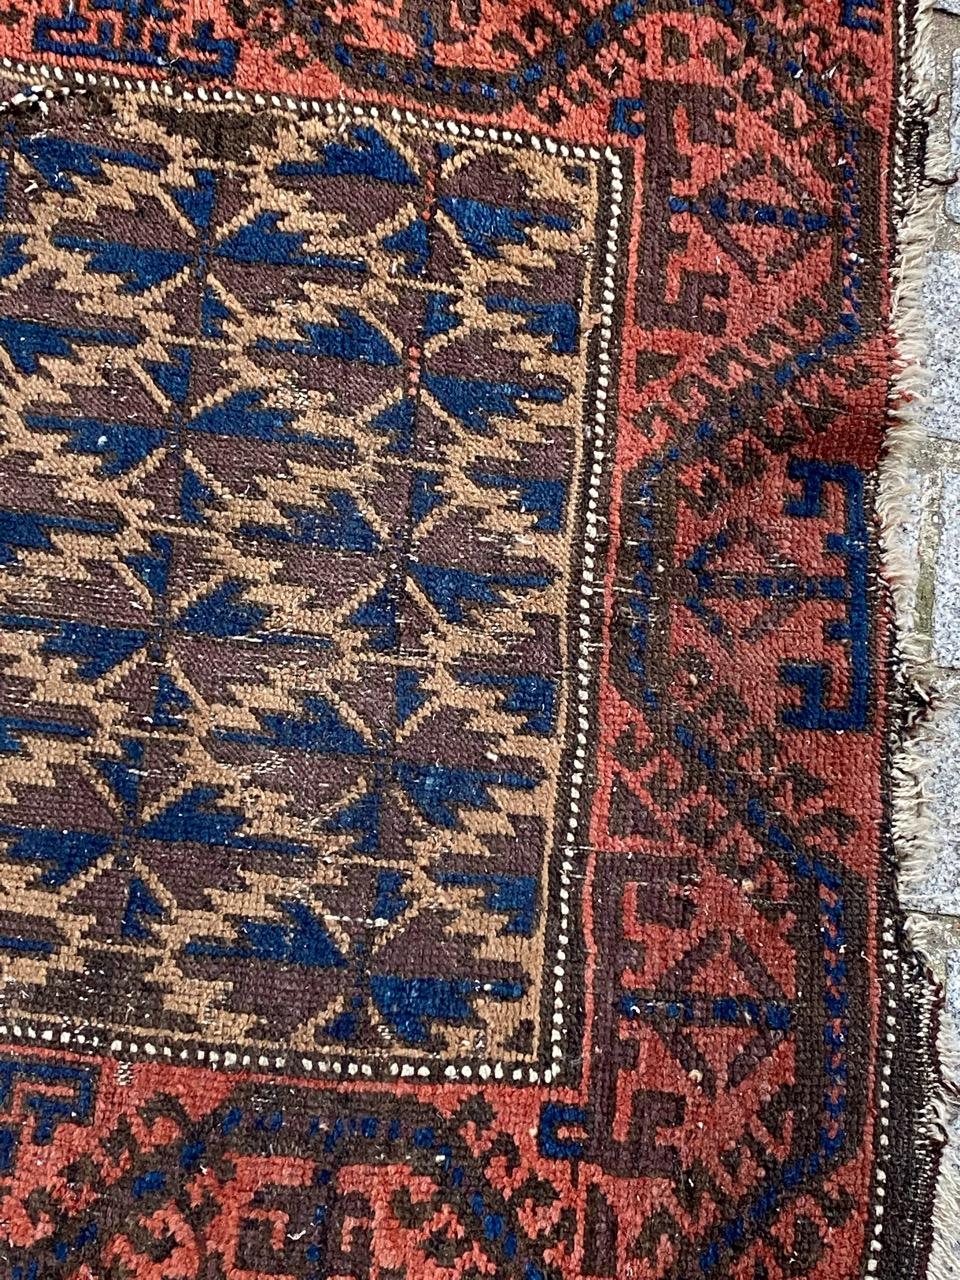 Little Baluch Afghan rug from late 19th century with beautiful tribal design and nice natural colors, entirely hand knotted with wool velvet on wool foundation.

✨✨✨
